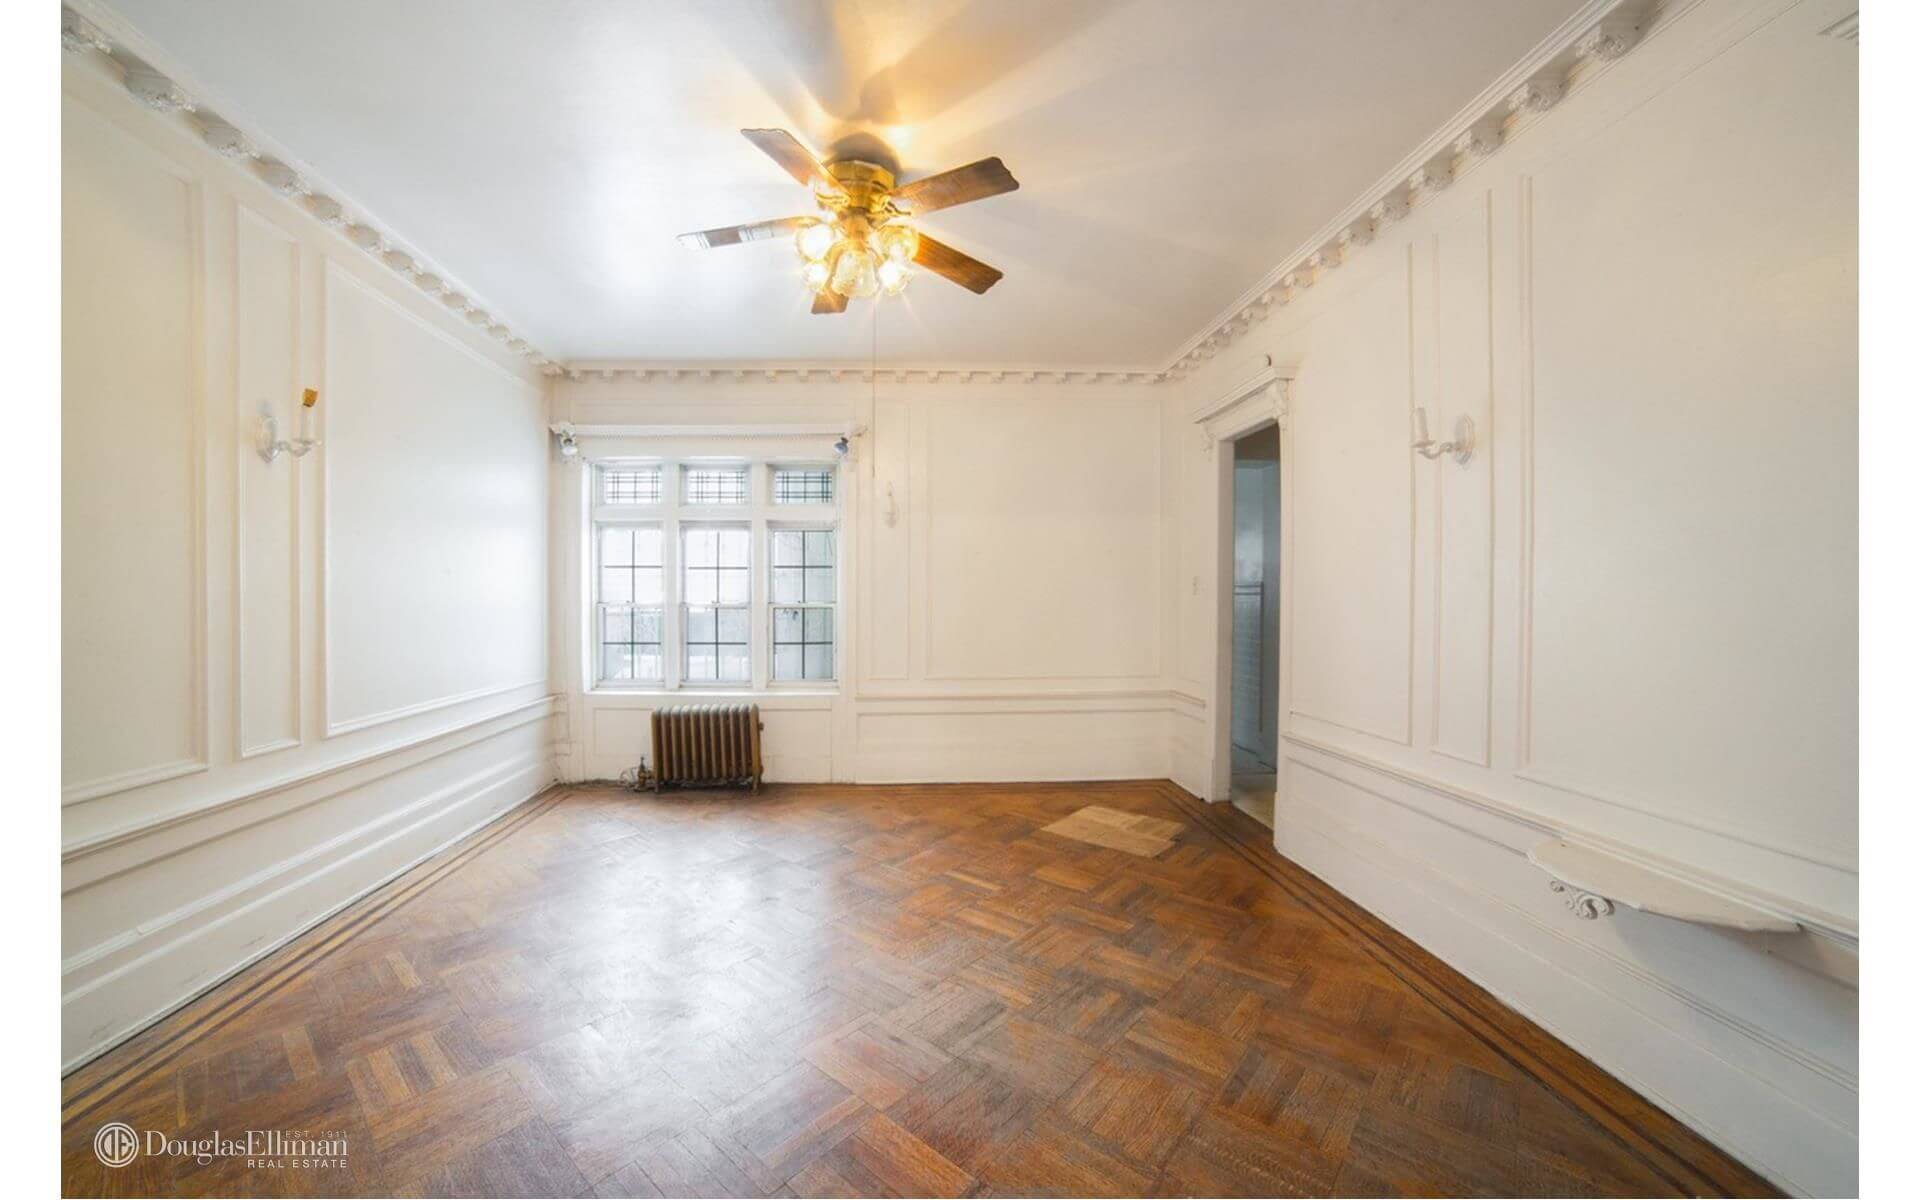 Brooklyn Homes for Sale in Prospect Lefferts Gardens at 112 Rutland Road